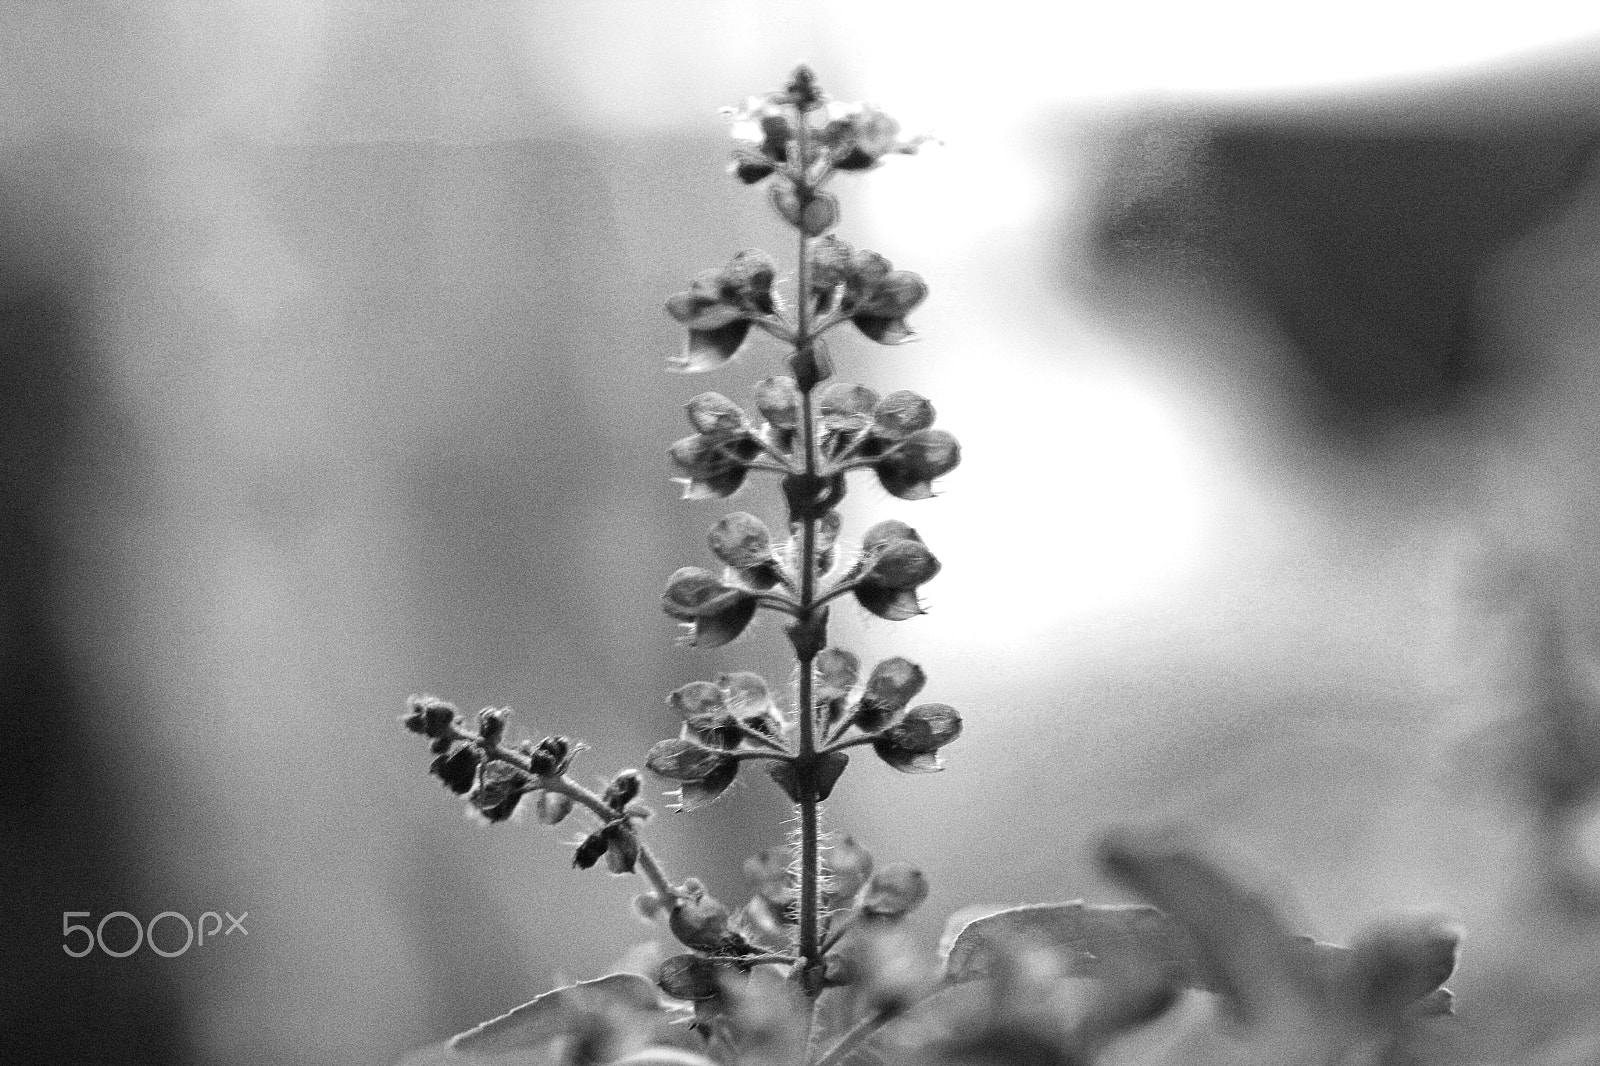 Sigma 50mm f/2.8 EX sample photo. The beauty of black and white photography